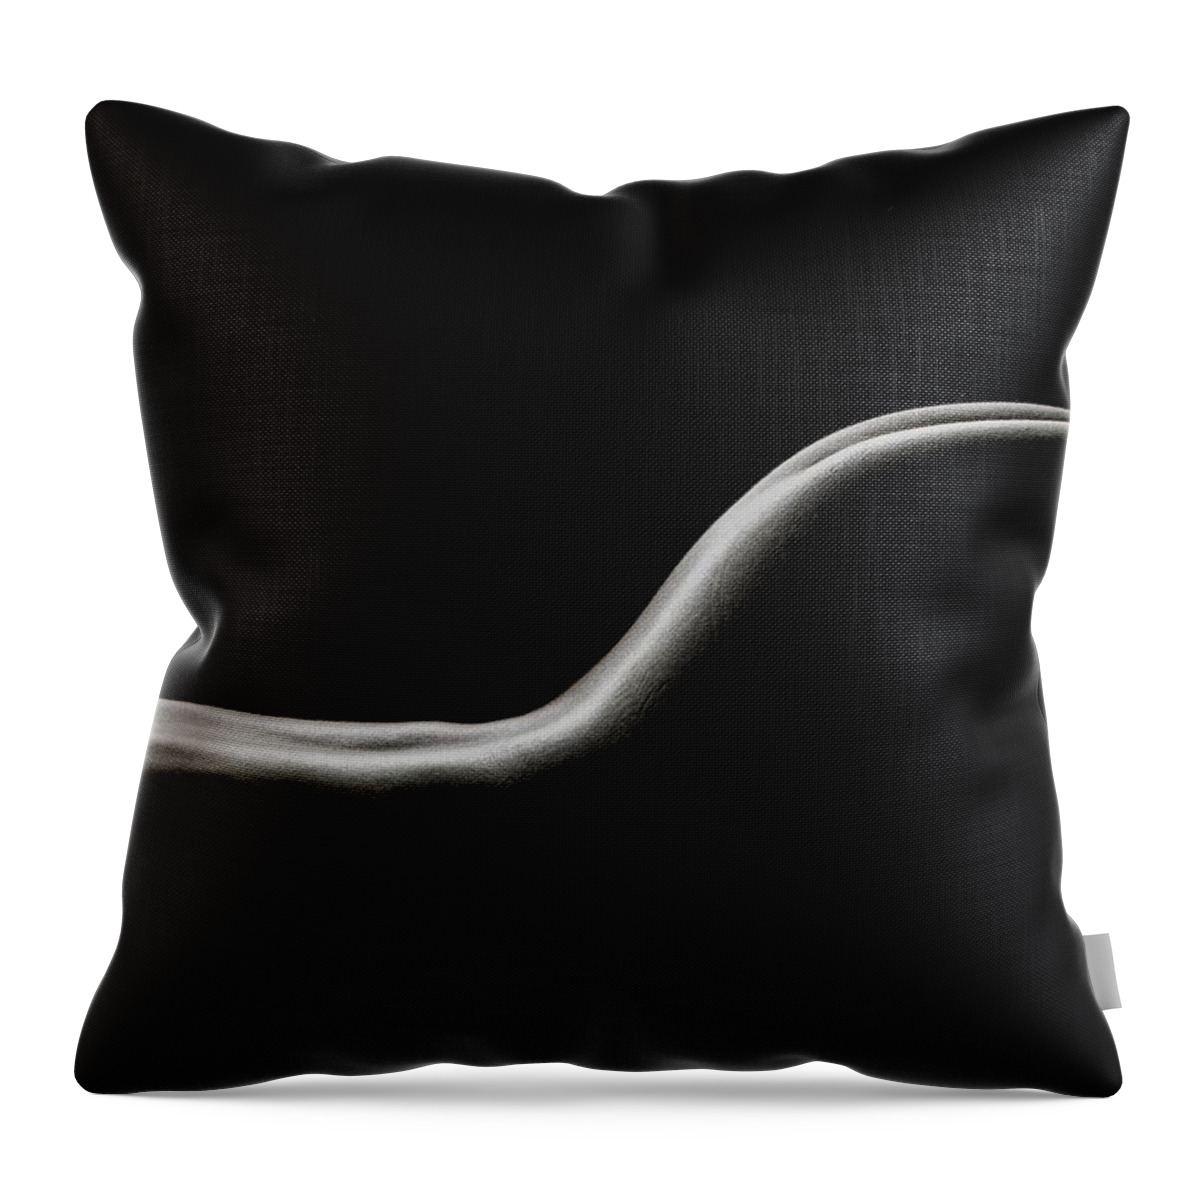 Nude Throw Pillow featuring the photograph Bodyscape 230 V2 by Michael Fryd